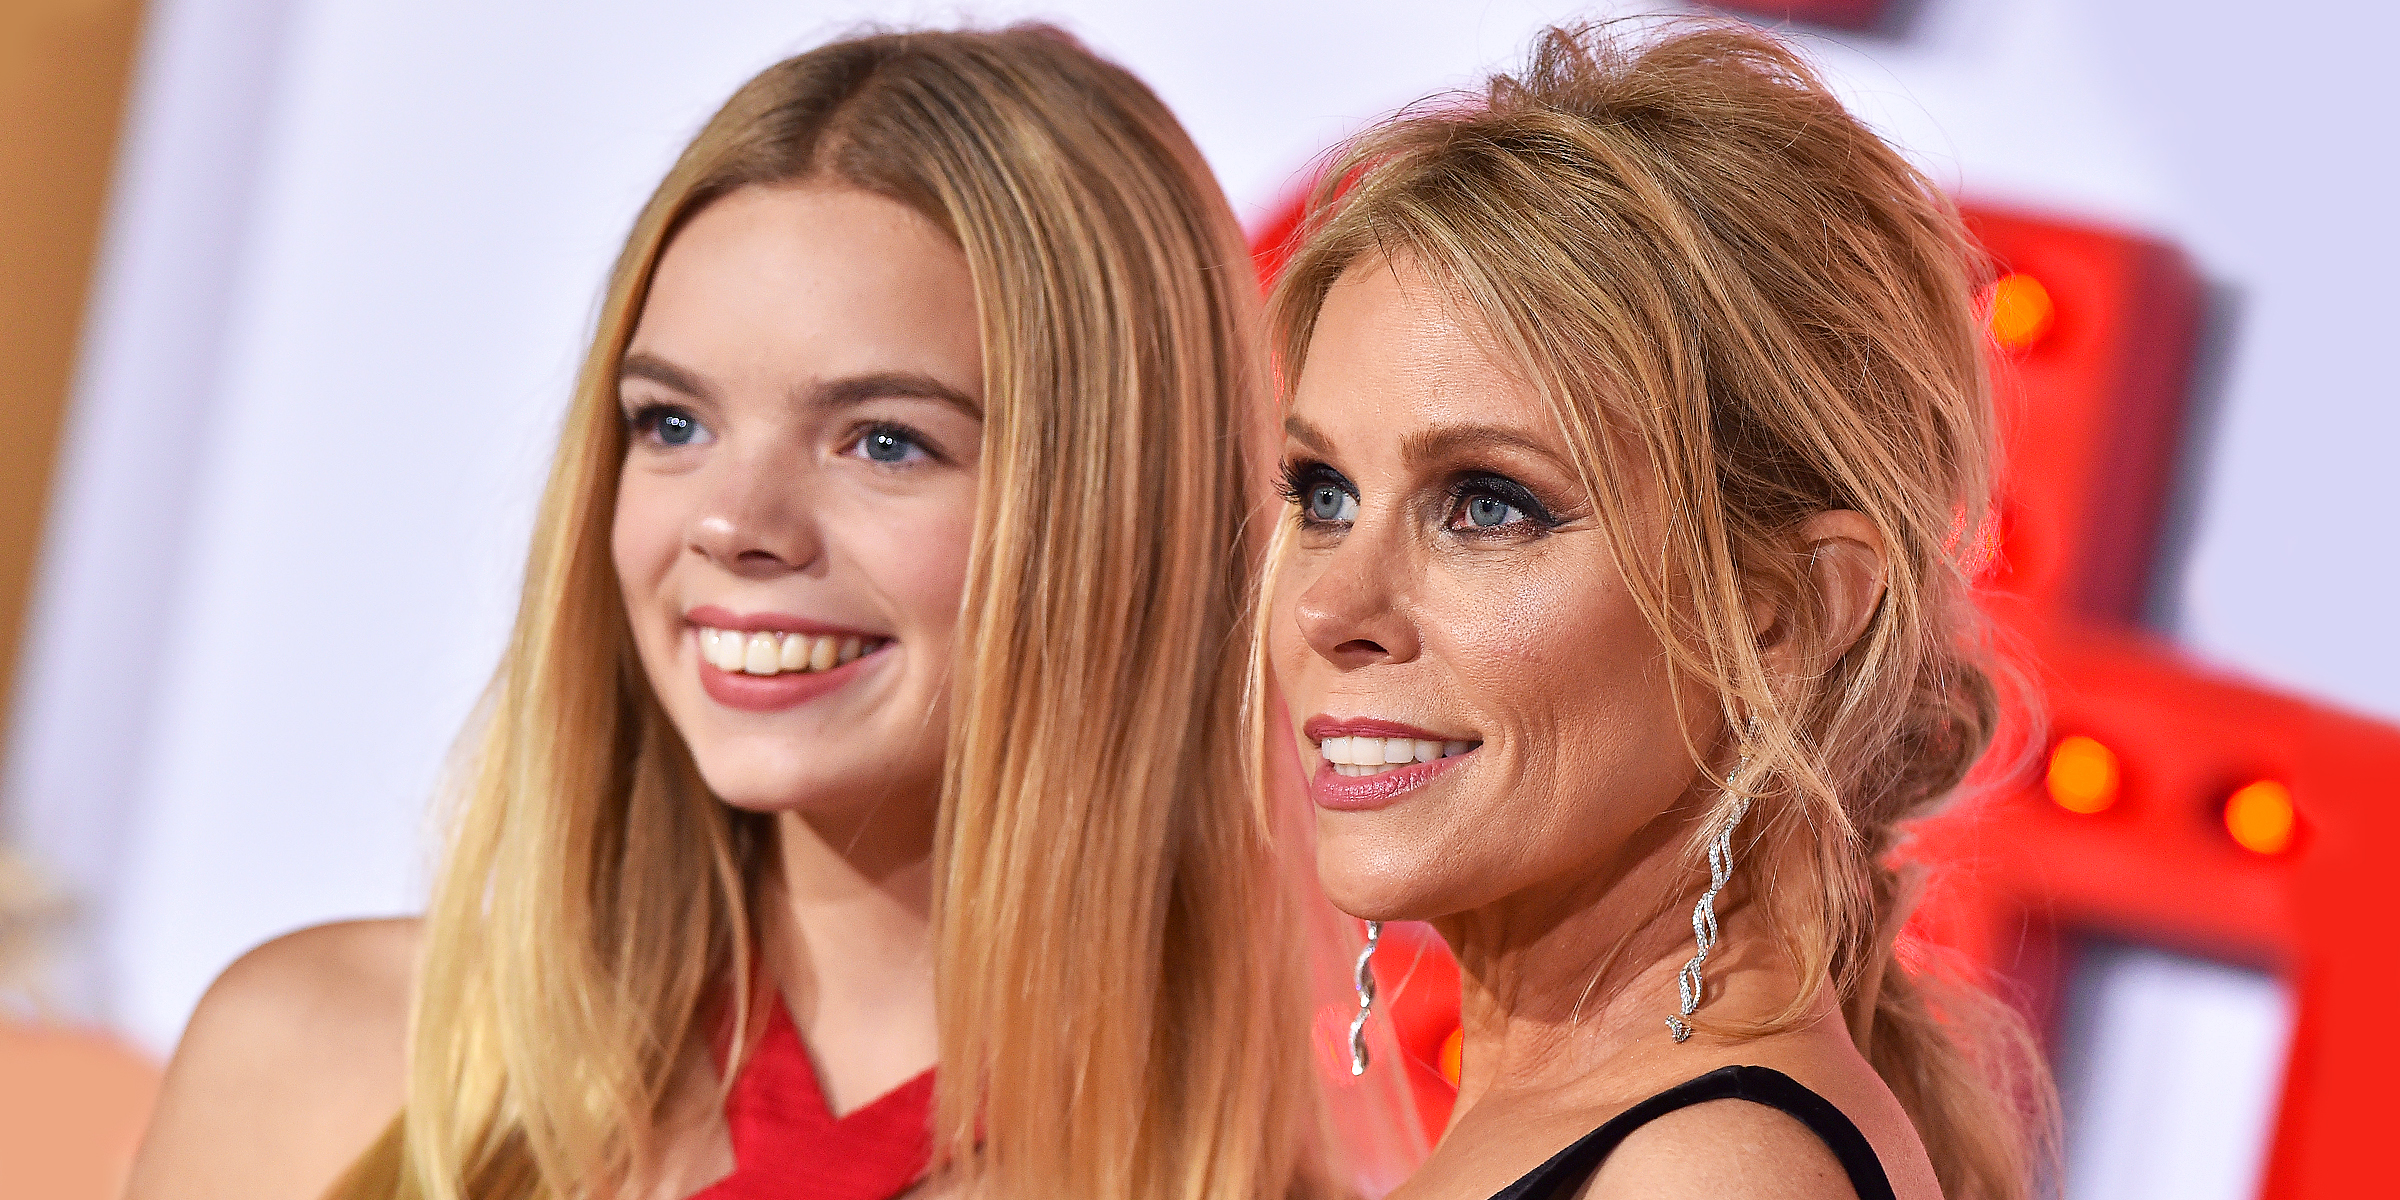 Catherine Young and Cheryl Hines. | Source: Getty Images